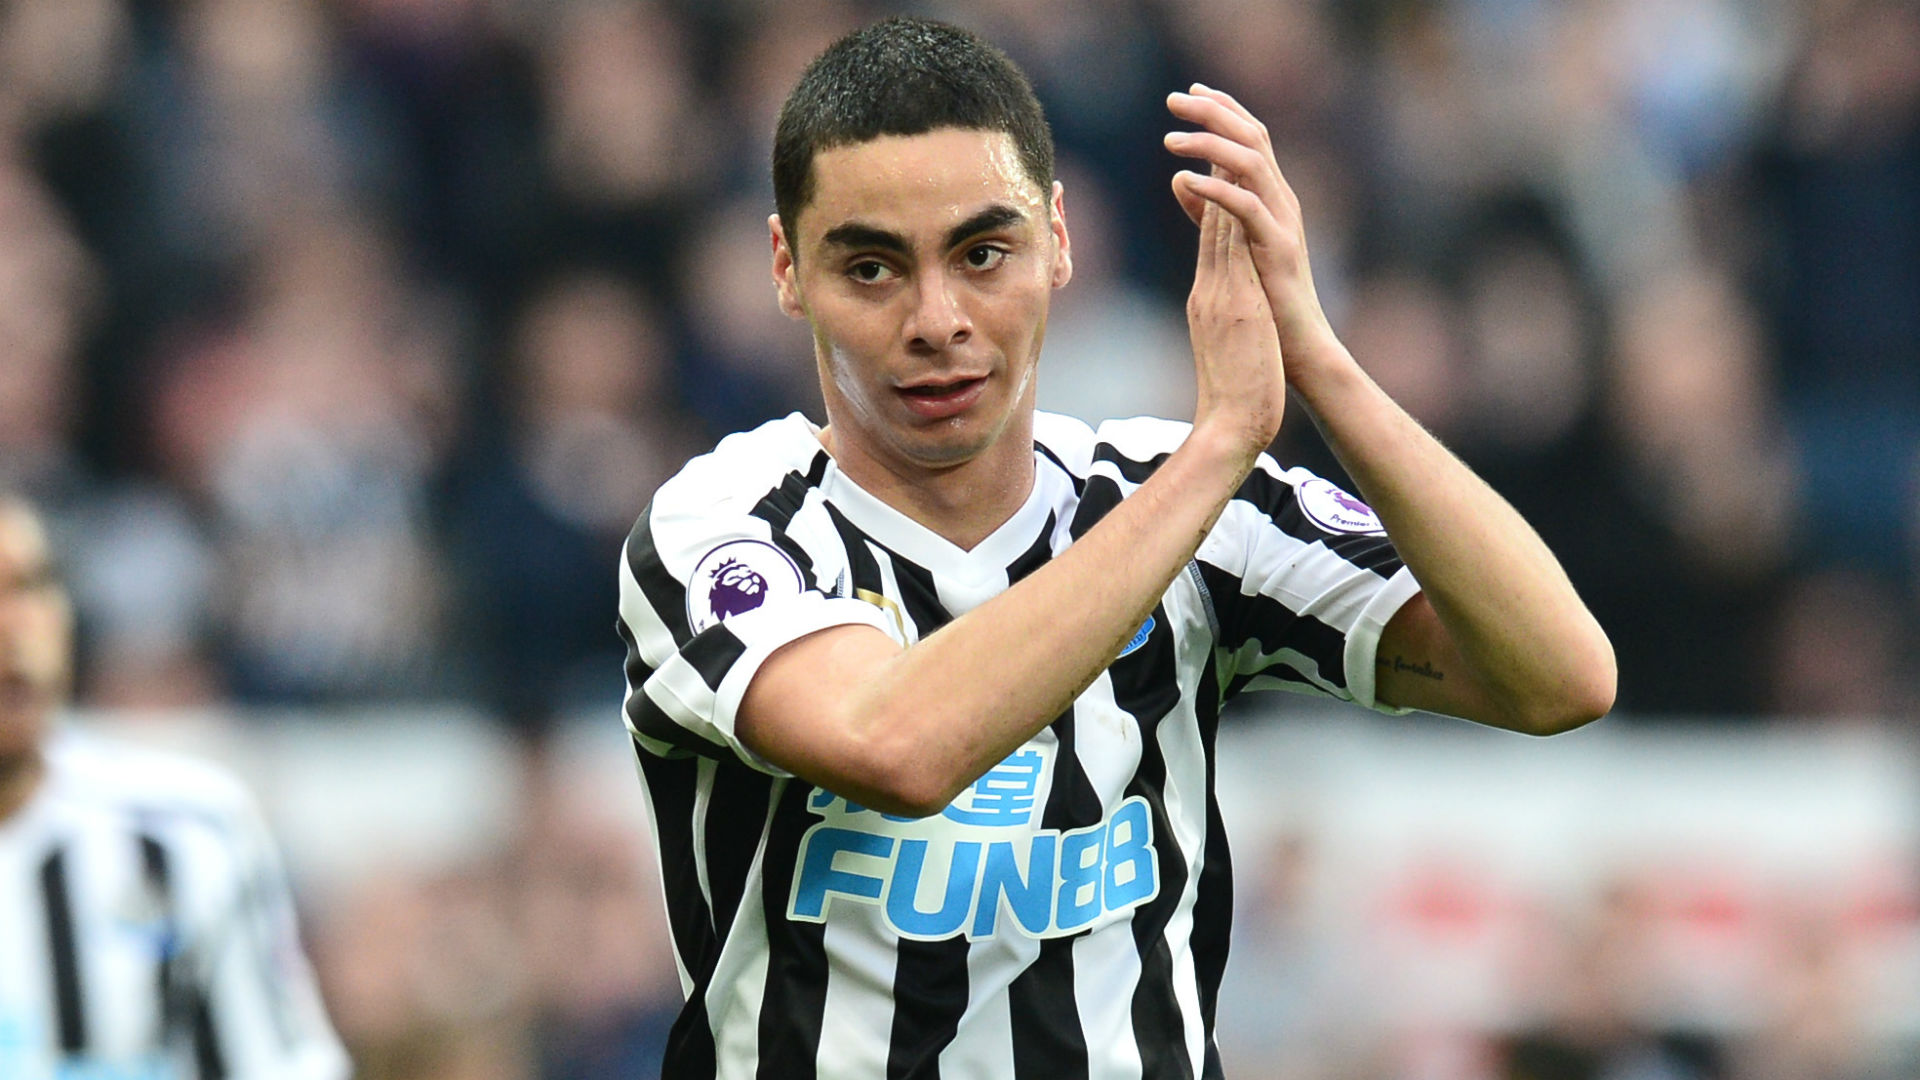 Premier League news: A great day for Newcastle record signing Miguel Almiron - Benitez ...